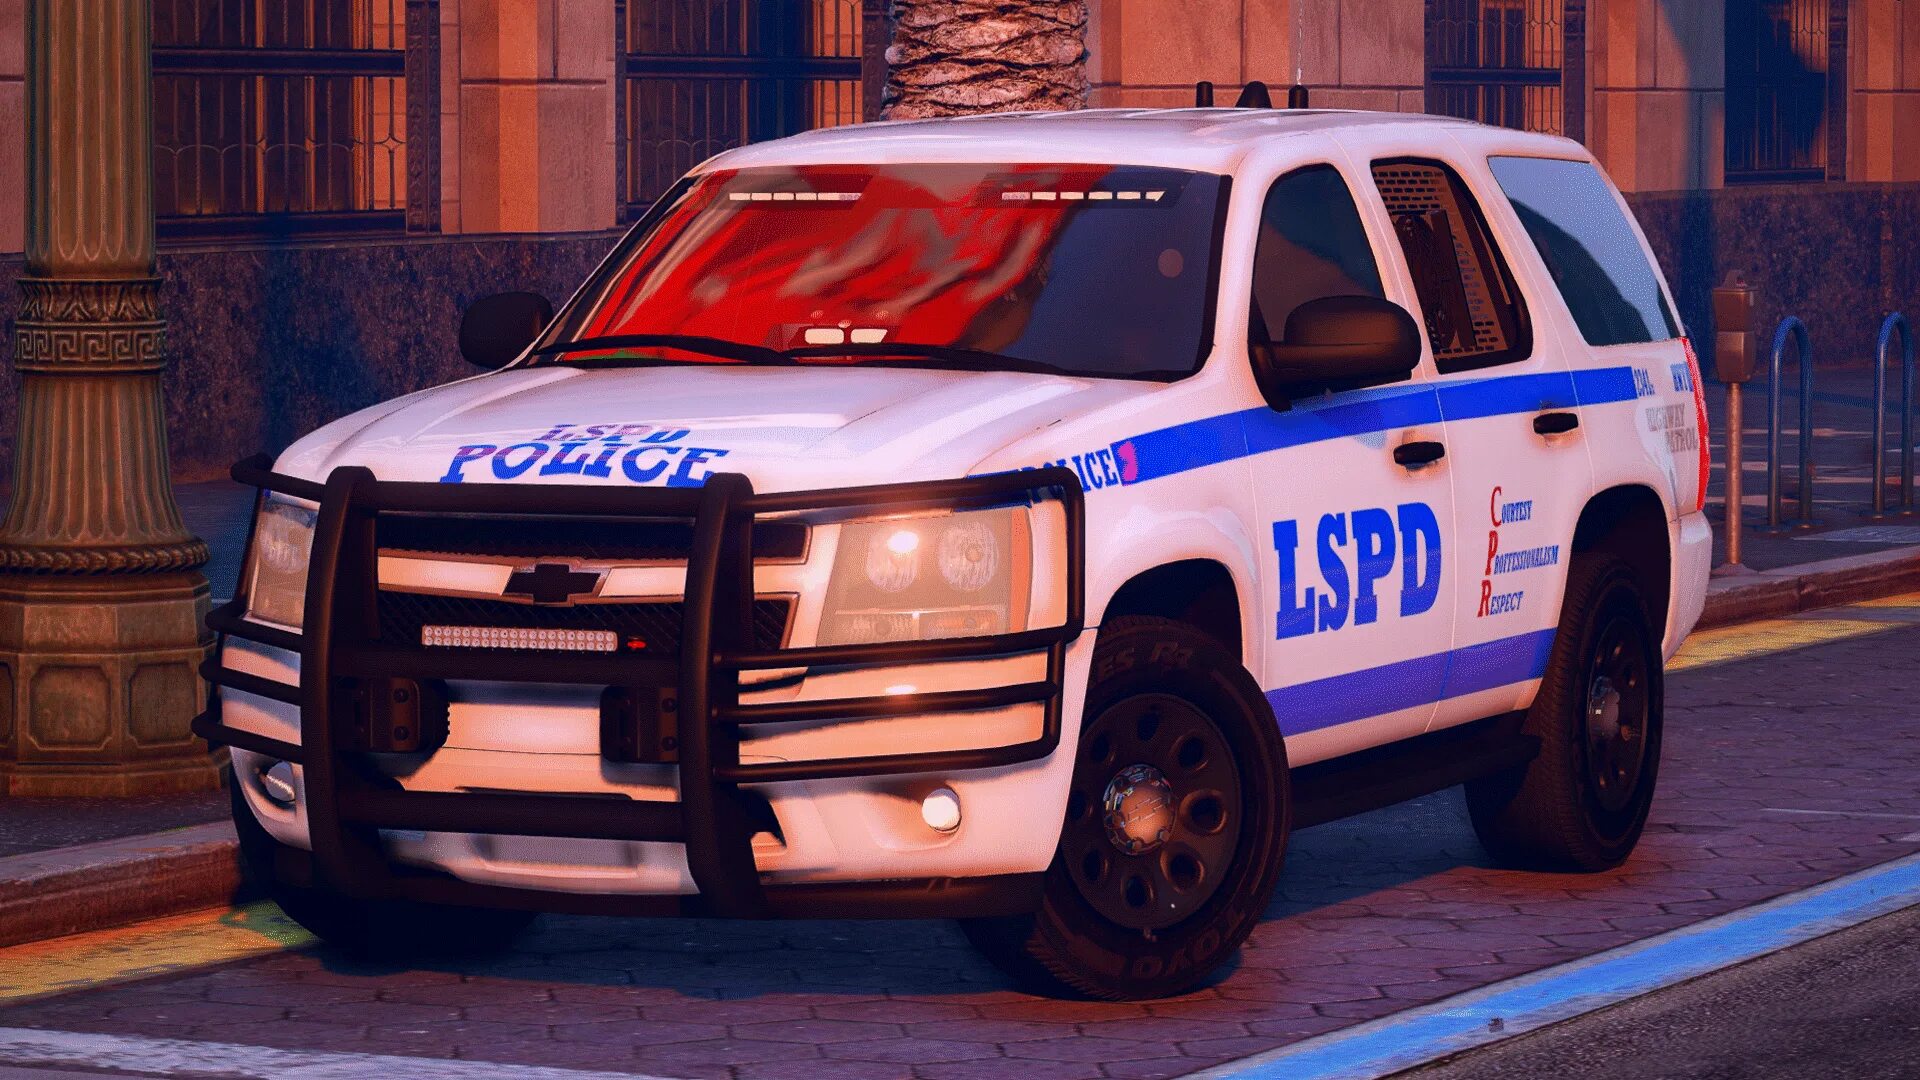 Police department tycoon mod. NYPD car Pack GTA 5. NYPD Police GTA 5. LSPD GTA 5. GTA 4 unmarked NYPD Pack.